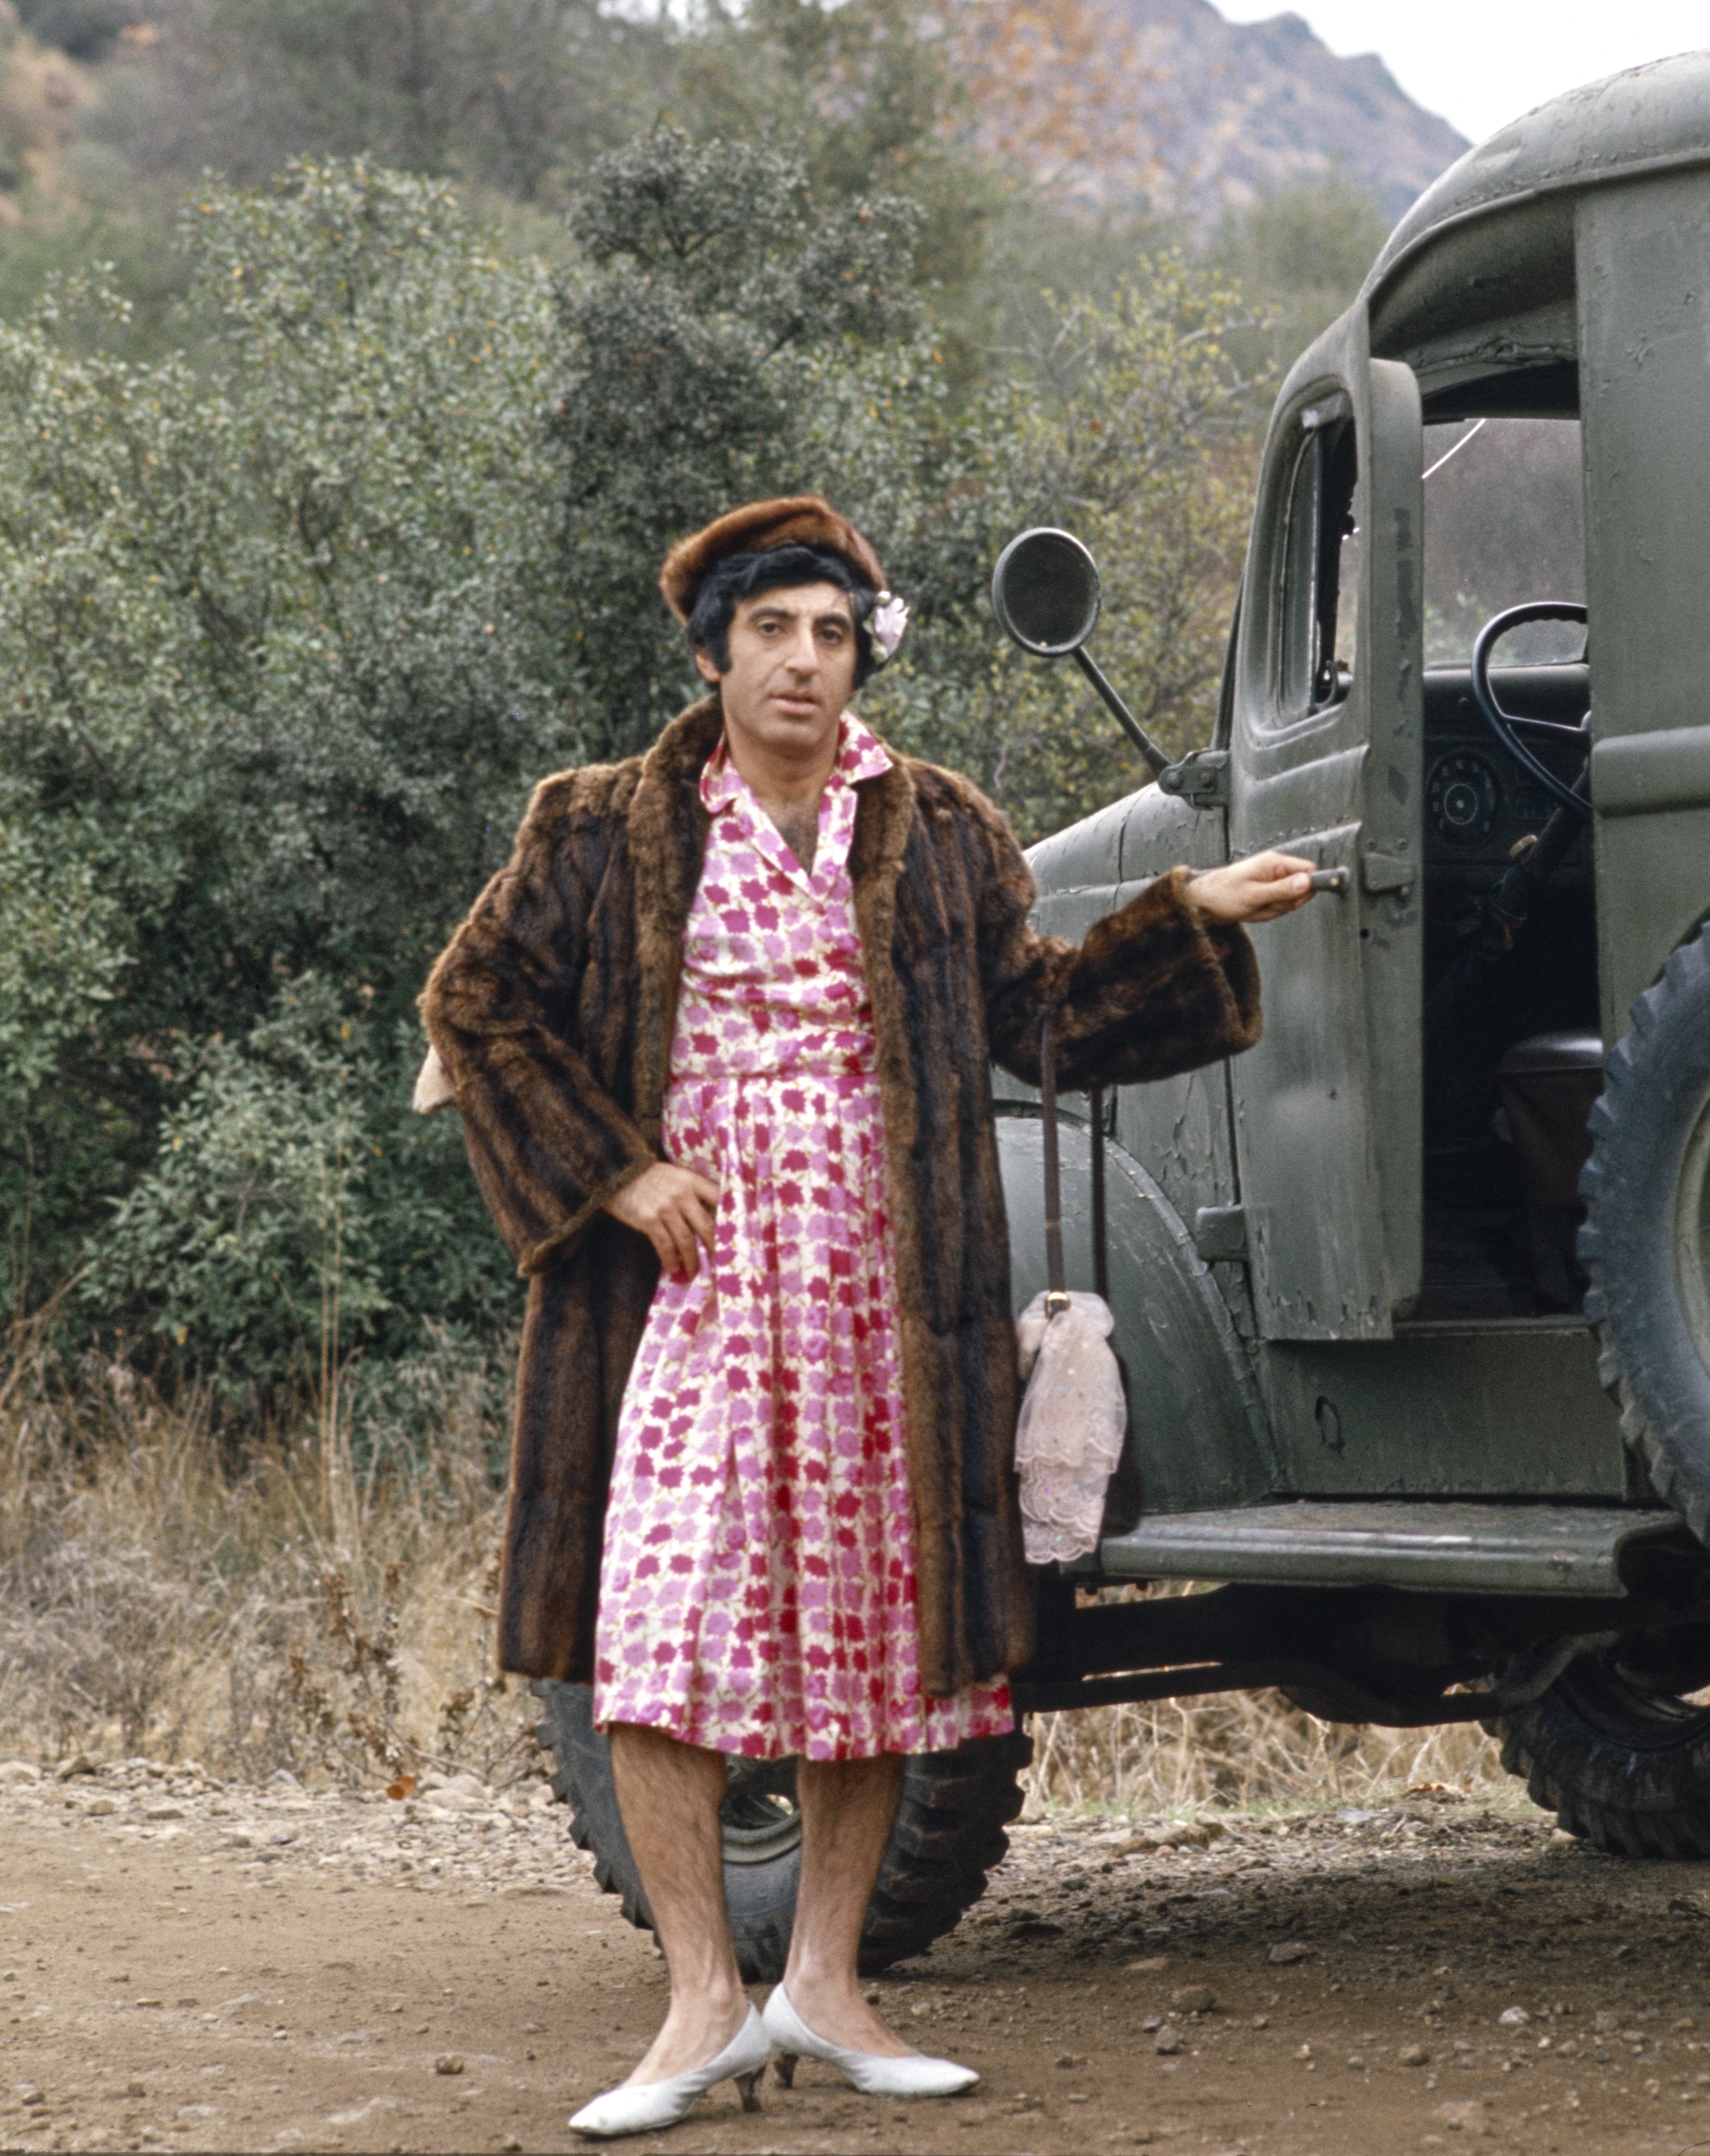 Jamie Farr (as Cpl. Maxwell Q. Klinger) on the CBS television sitcom, MASH (M*A*S*H). 1977. | Source: Getty Images